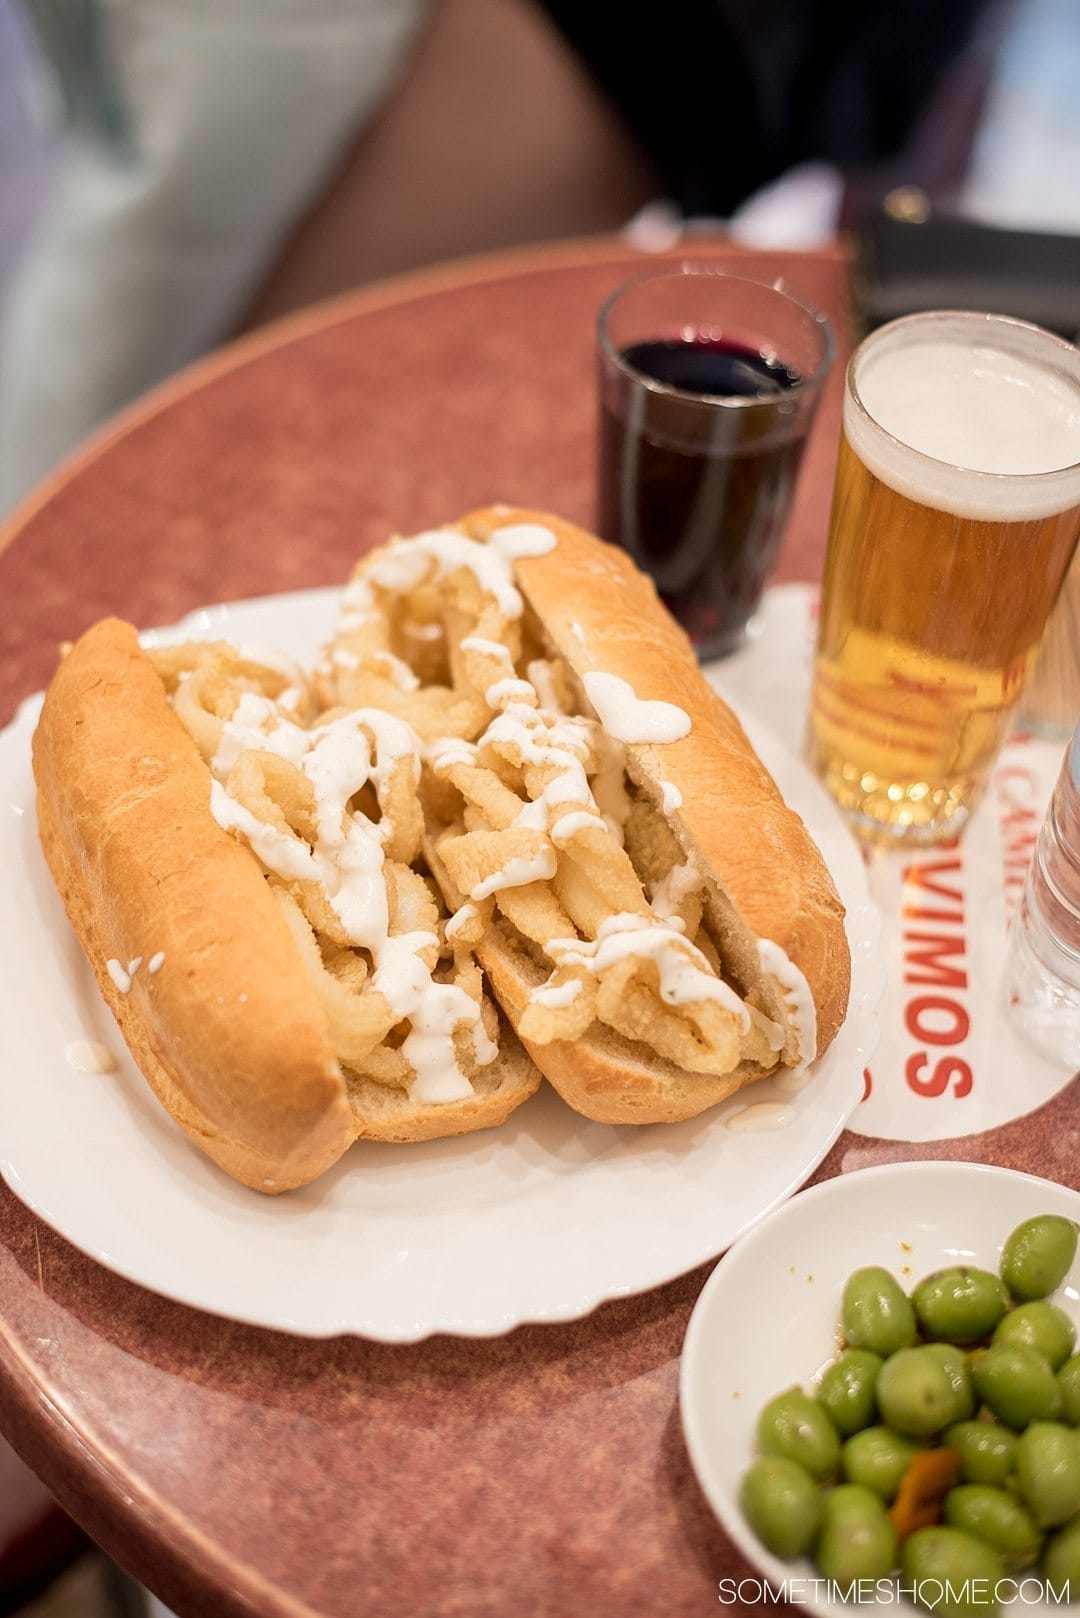 Best Thing I Ever Ate: Madrid, Spain. On Sometimes Home travel blog. Photos of a Calamares Bocadillo in Madrid at La Campana. (Calamari Sandwich)